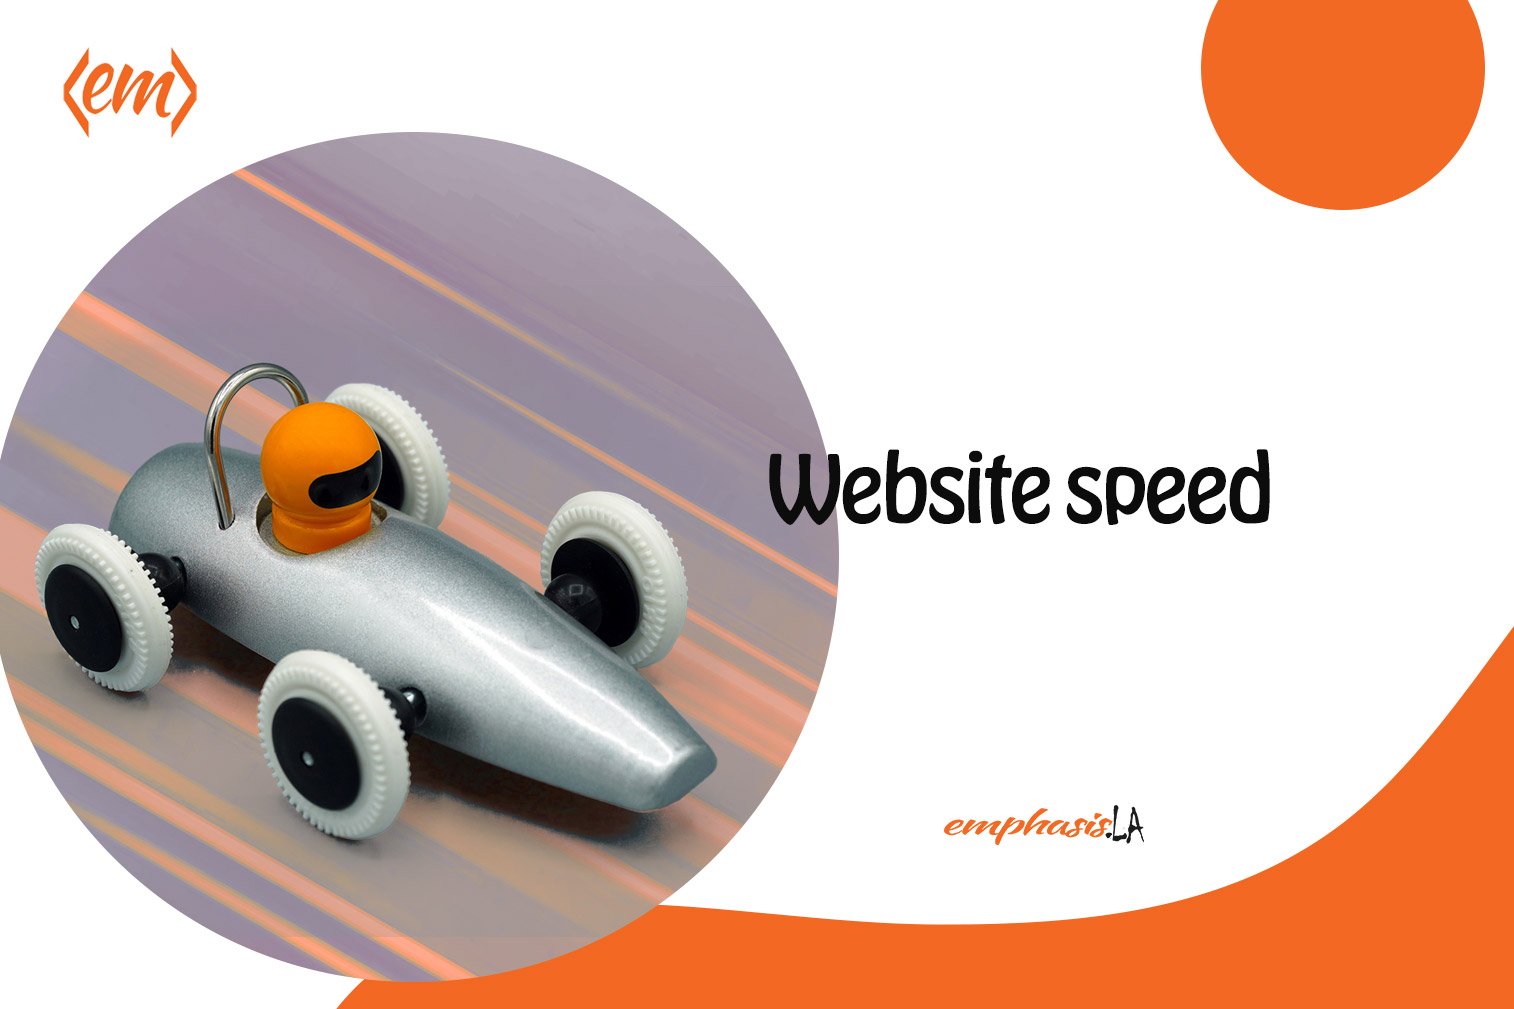 a toy car in foreground, blurred background gives appearance of going fast. Text reads "Website Speed"